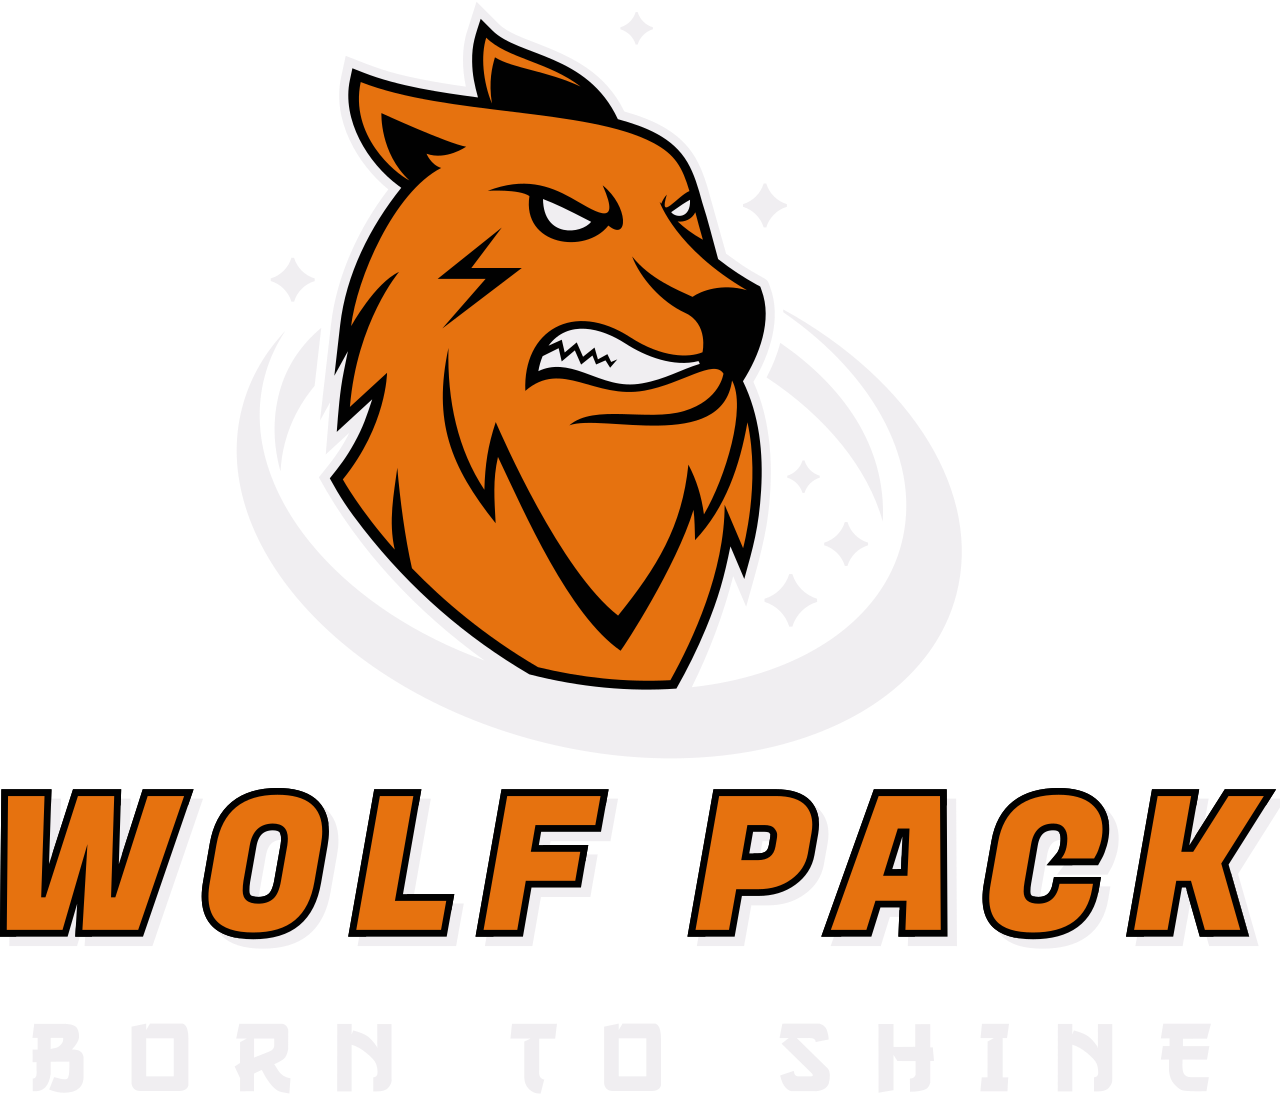 Wolf Pack's logo